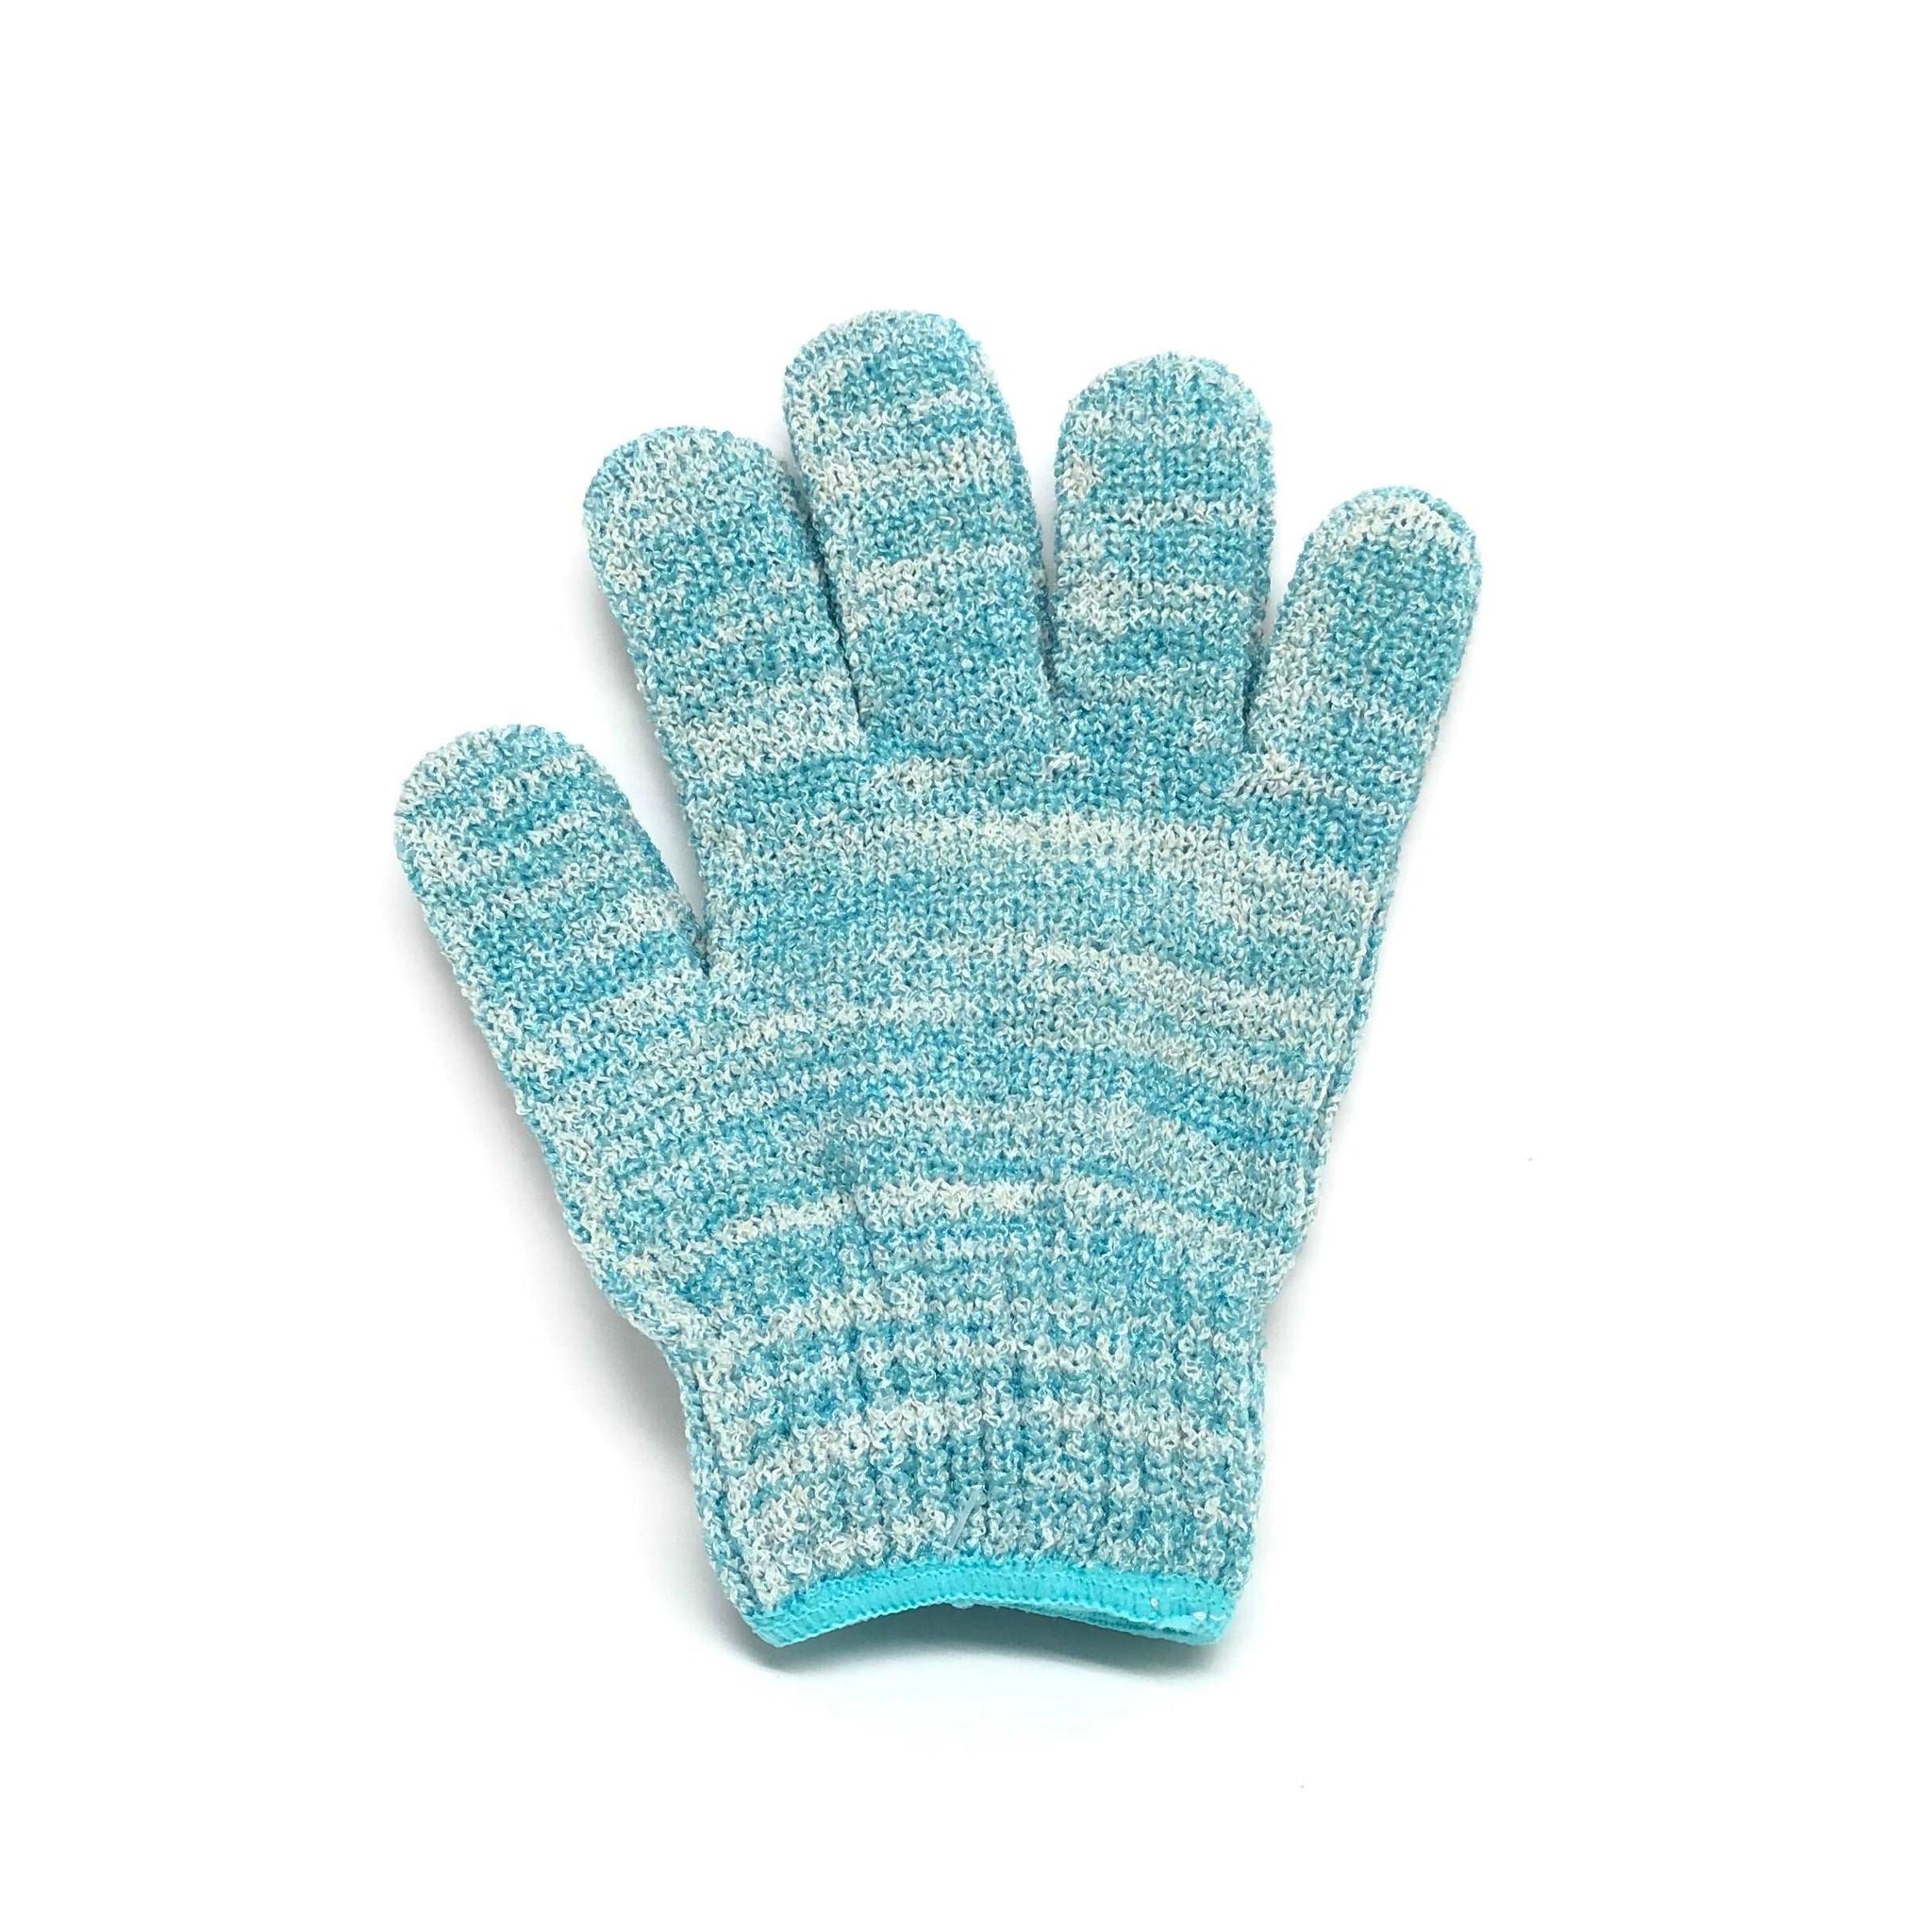 Our high quality shower gloves have a gentle, soft texture for exfoliating and can be used for both facial and body applications in the bath or shower. Sold in pairs.  Blue set.